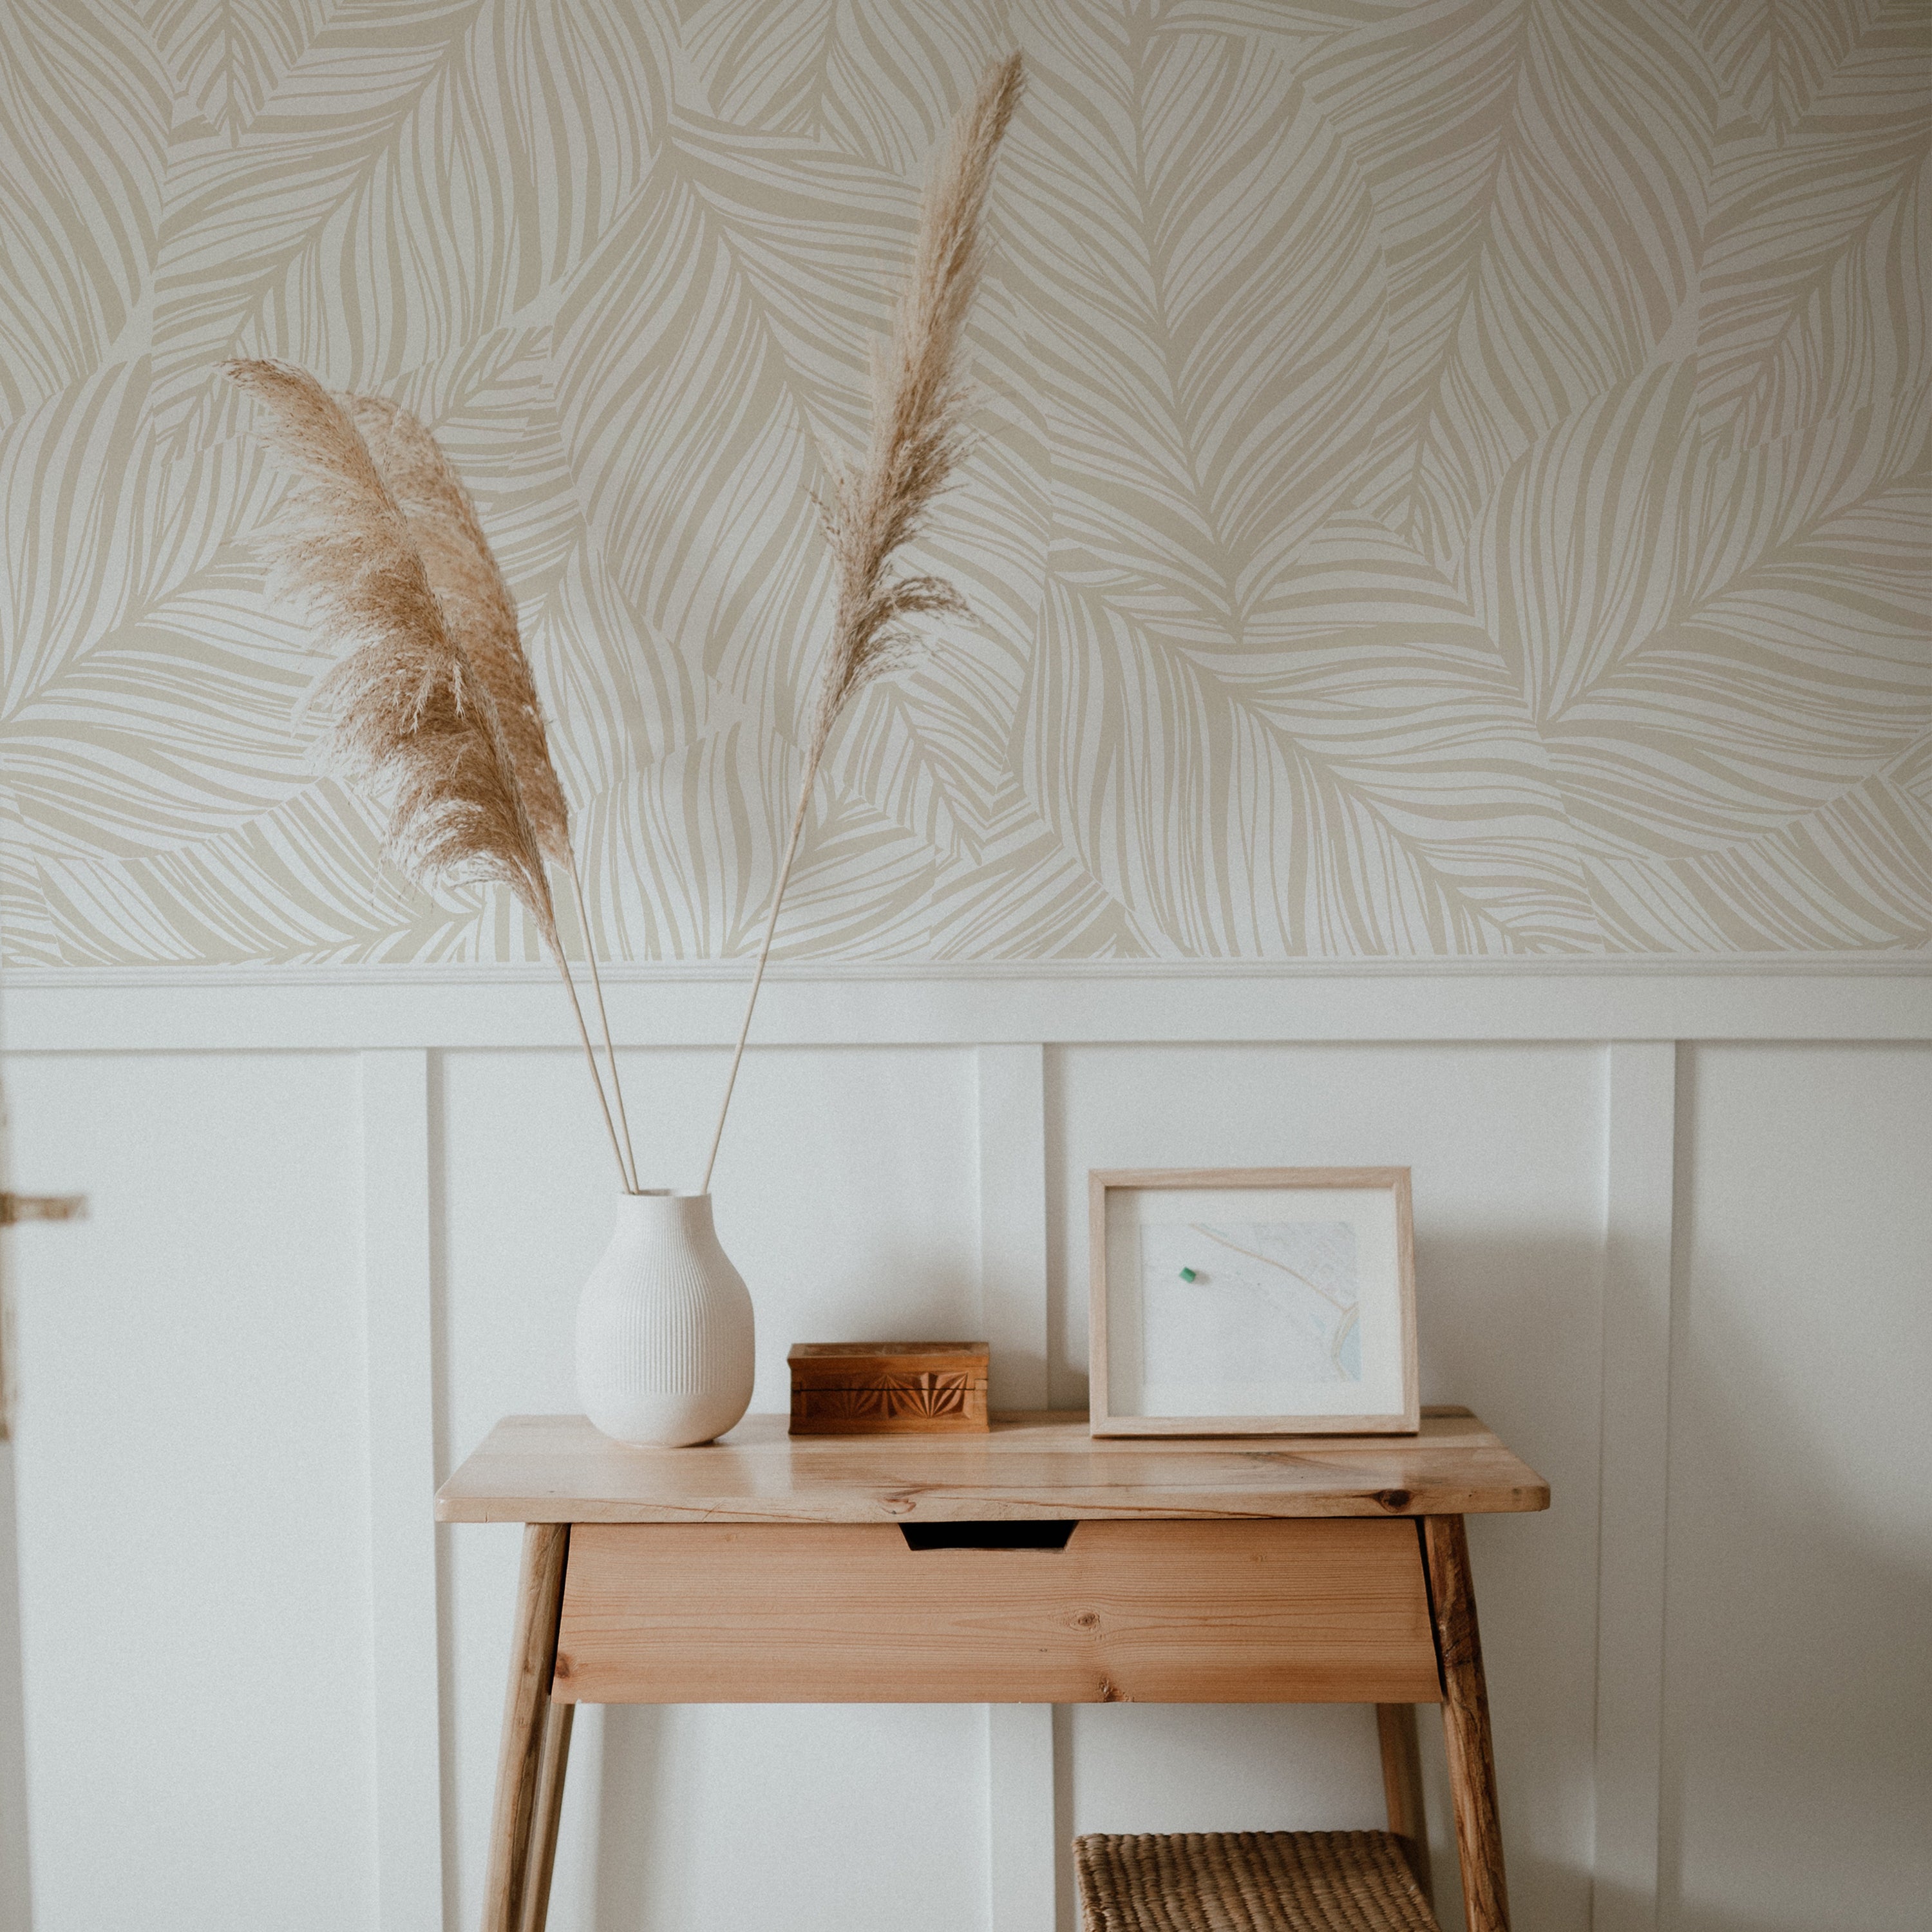 A cozy corner of a room featuring the same ecru leaf-patterned wallpaper as a backdrop. In the foreground, a simple wooden console table holds a tall, slender white vase with two pampas grass stems, complementing the wallpaper's organic theme. A framed abstract artwork and a small wooden box rest beside the vase, against a white wainscoting that adds architectural detail.